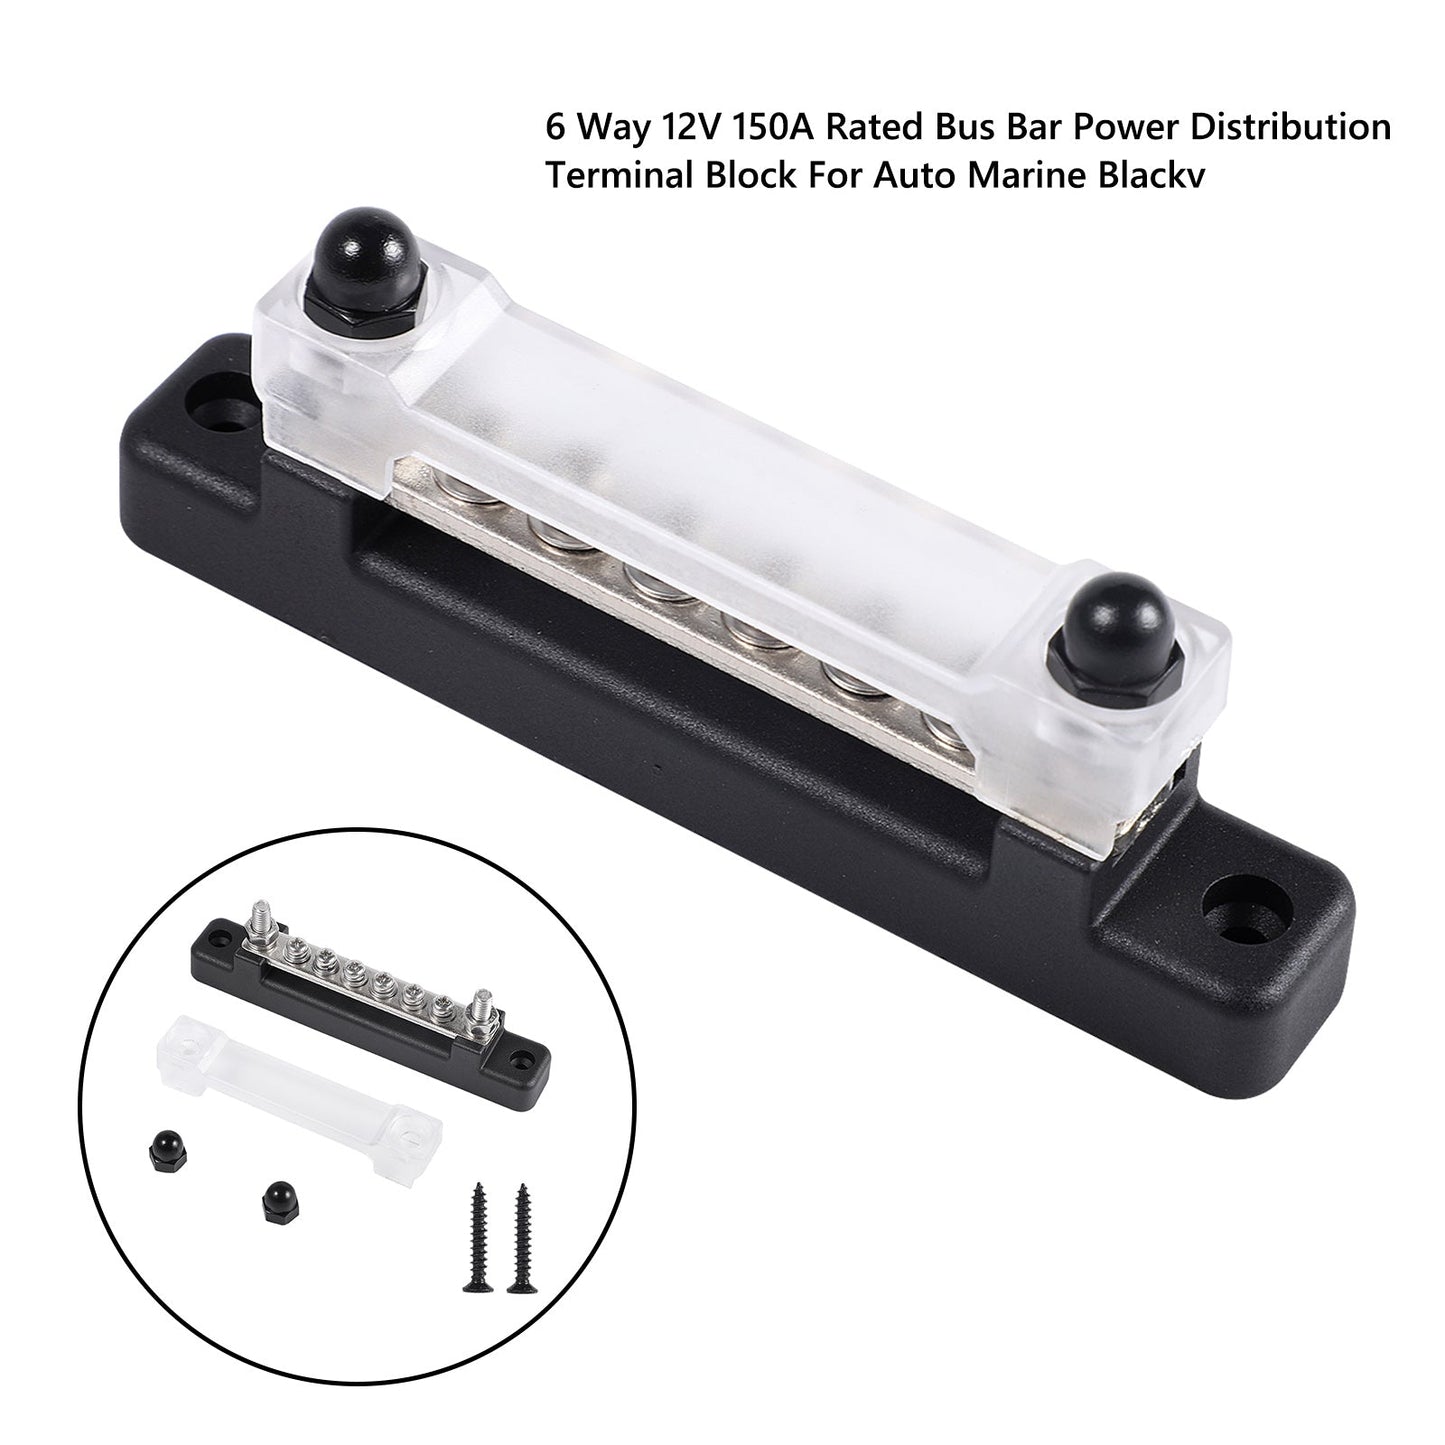 6 Way 12V Rated Bus Bar Power Distribution Terminal Block For Auto Marine Black